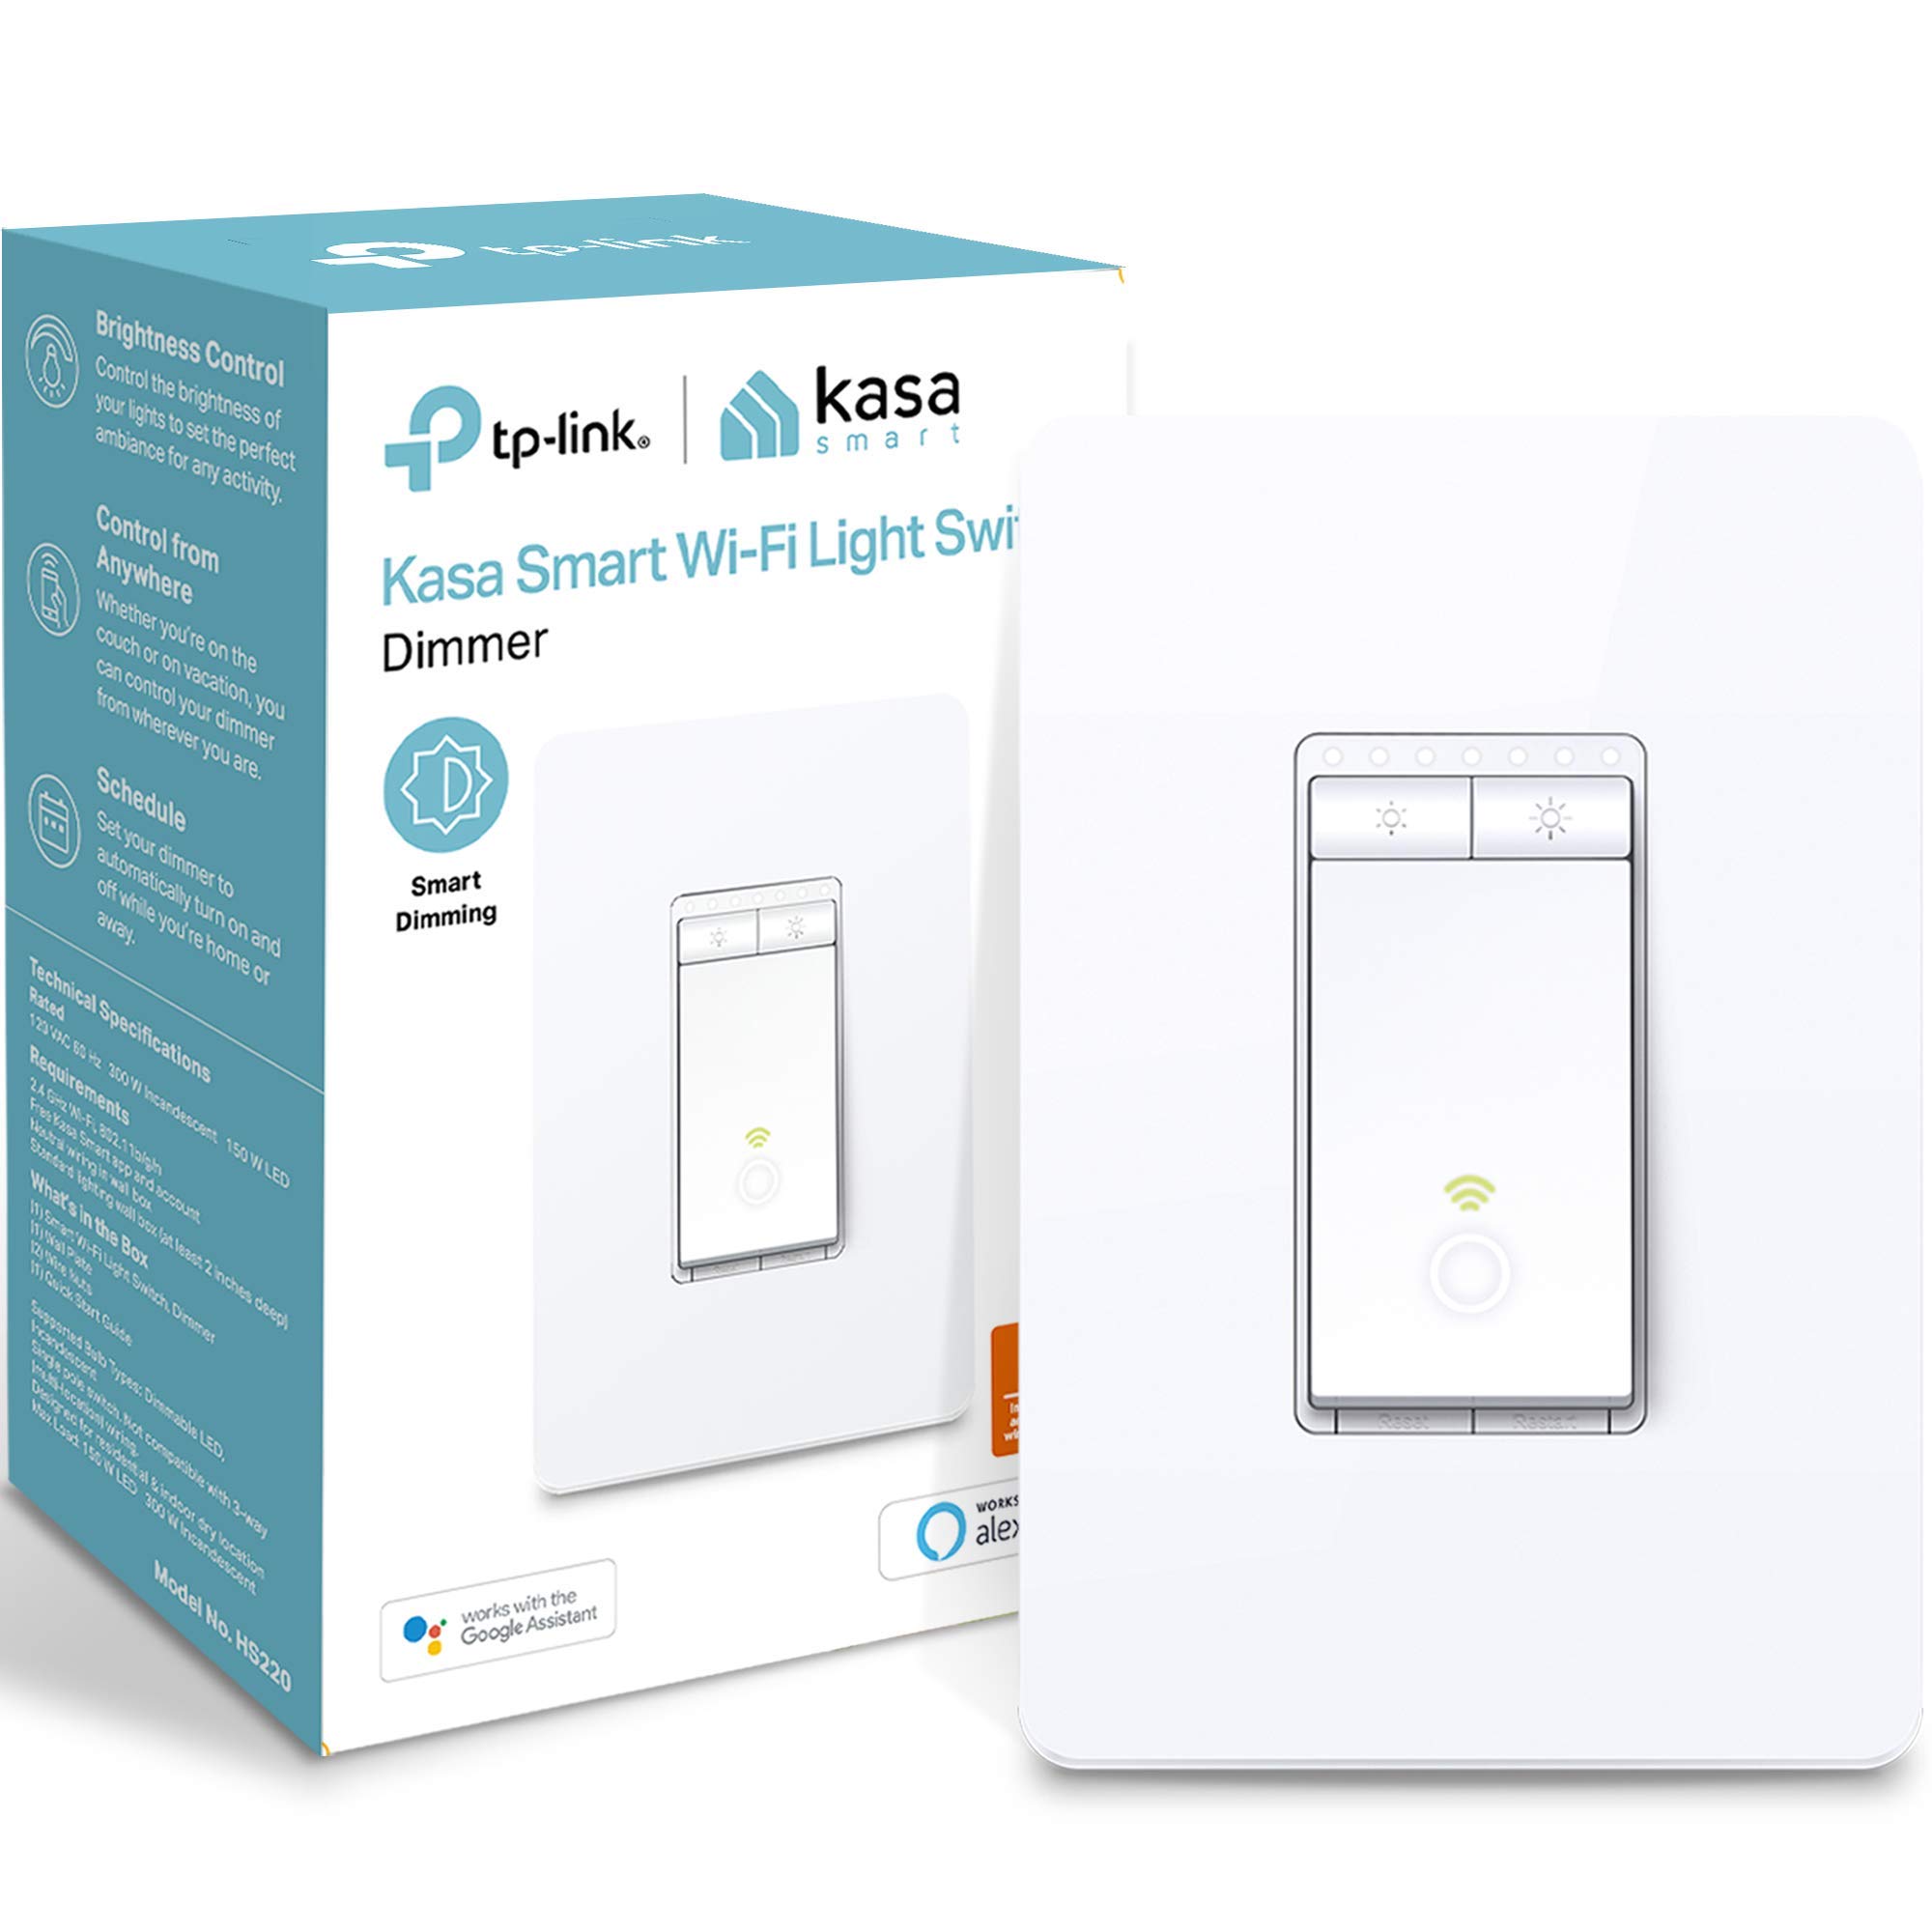 TP-Link Kasa HS220 Smart Dimmer Switch $10.38 + Free Shipping w/ Prime or on orders $25+